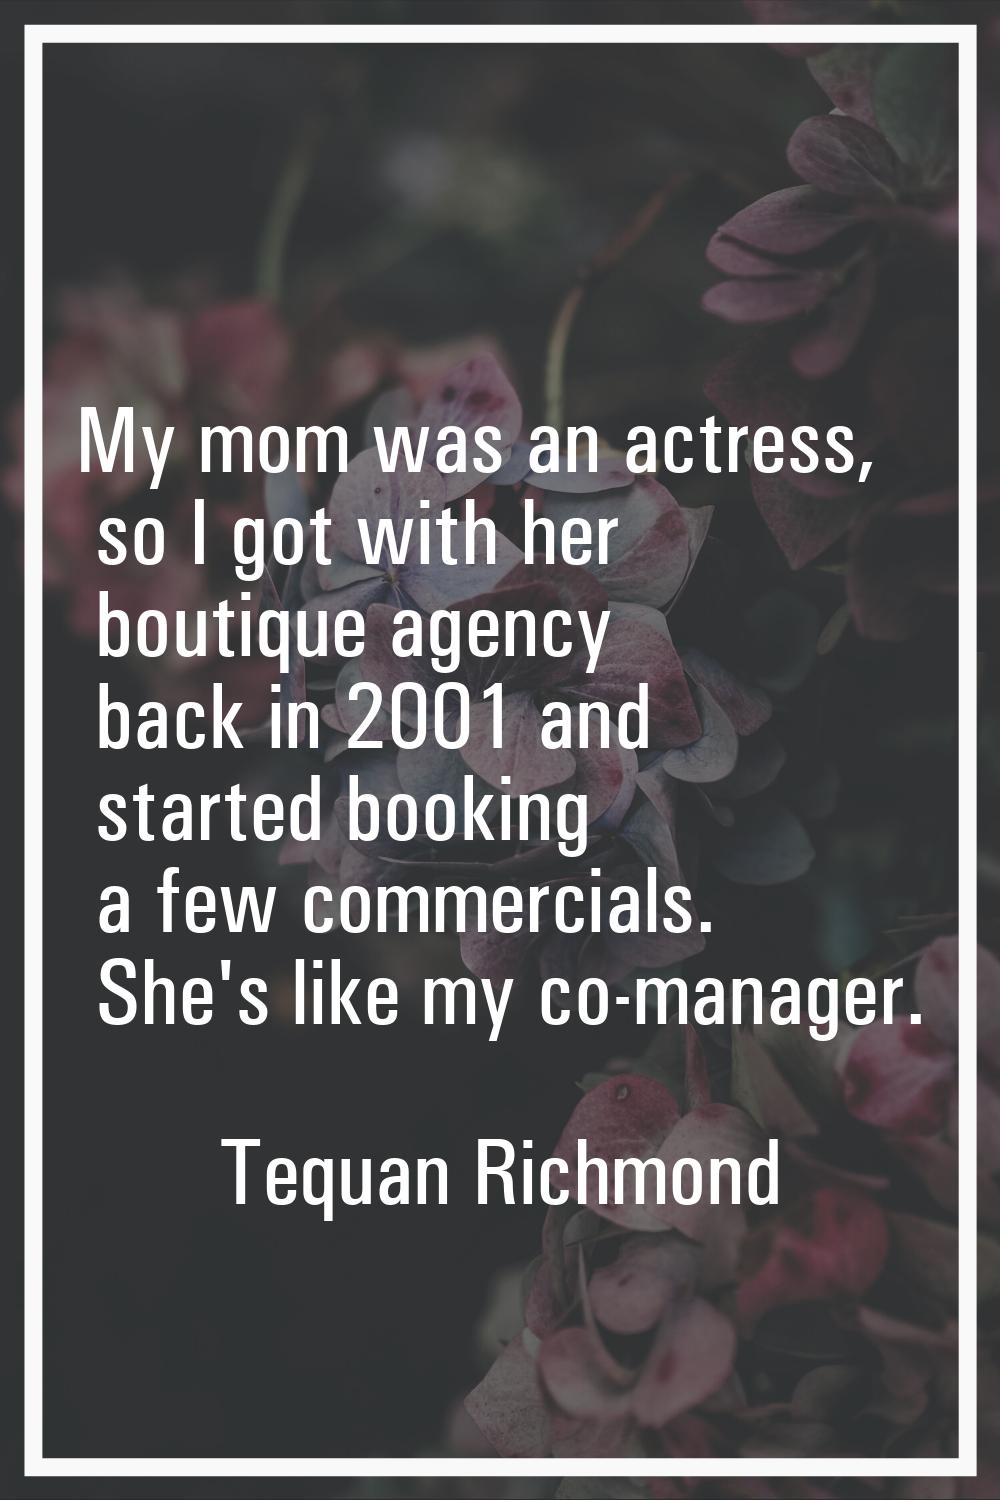 My mom was an actress, so I got with her boutique agency back in 2001 and started booking a few com